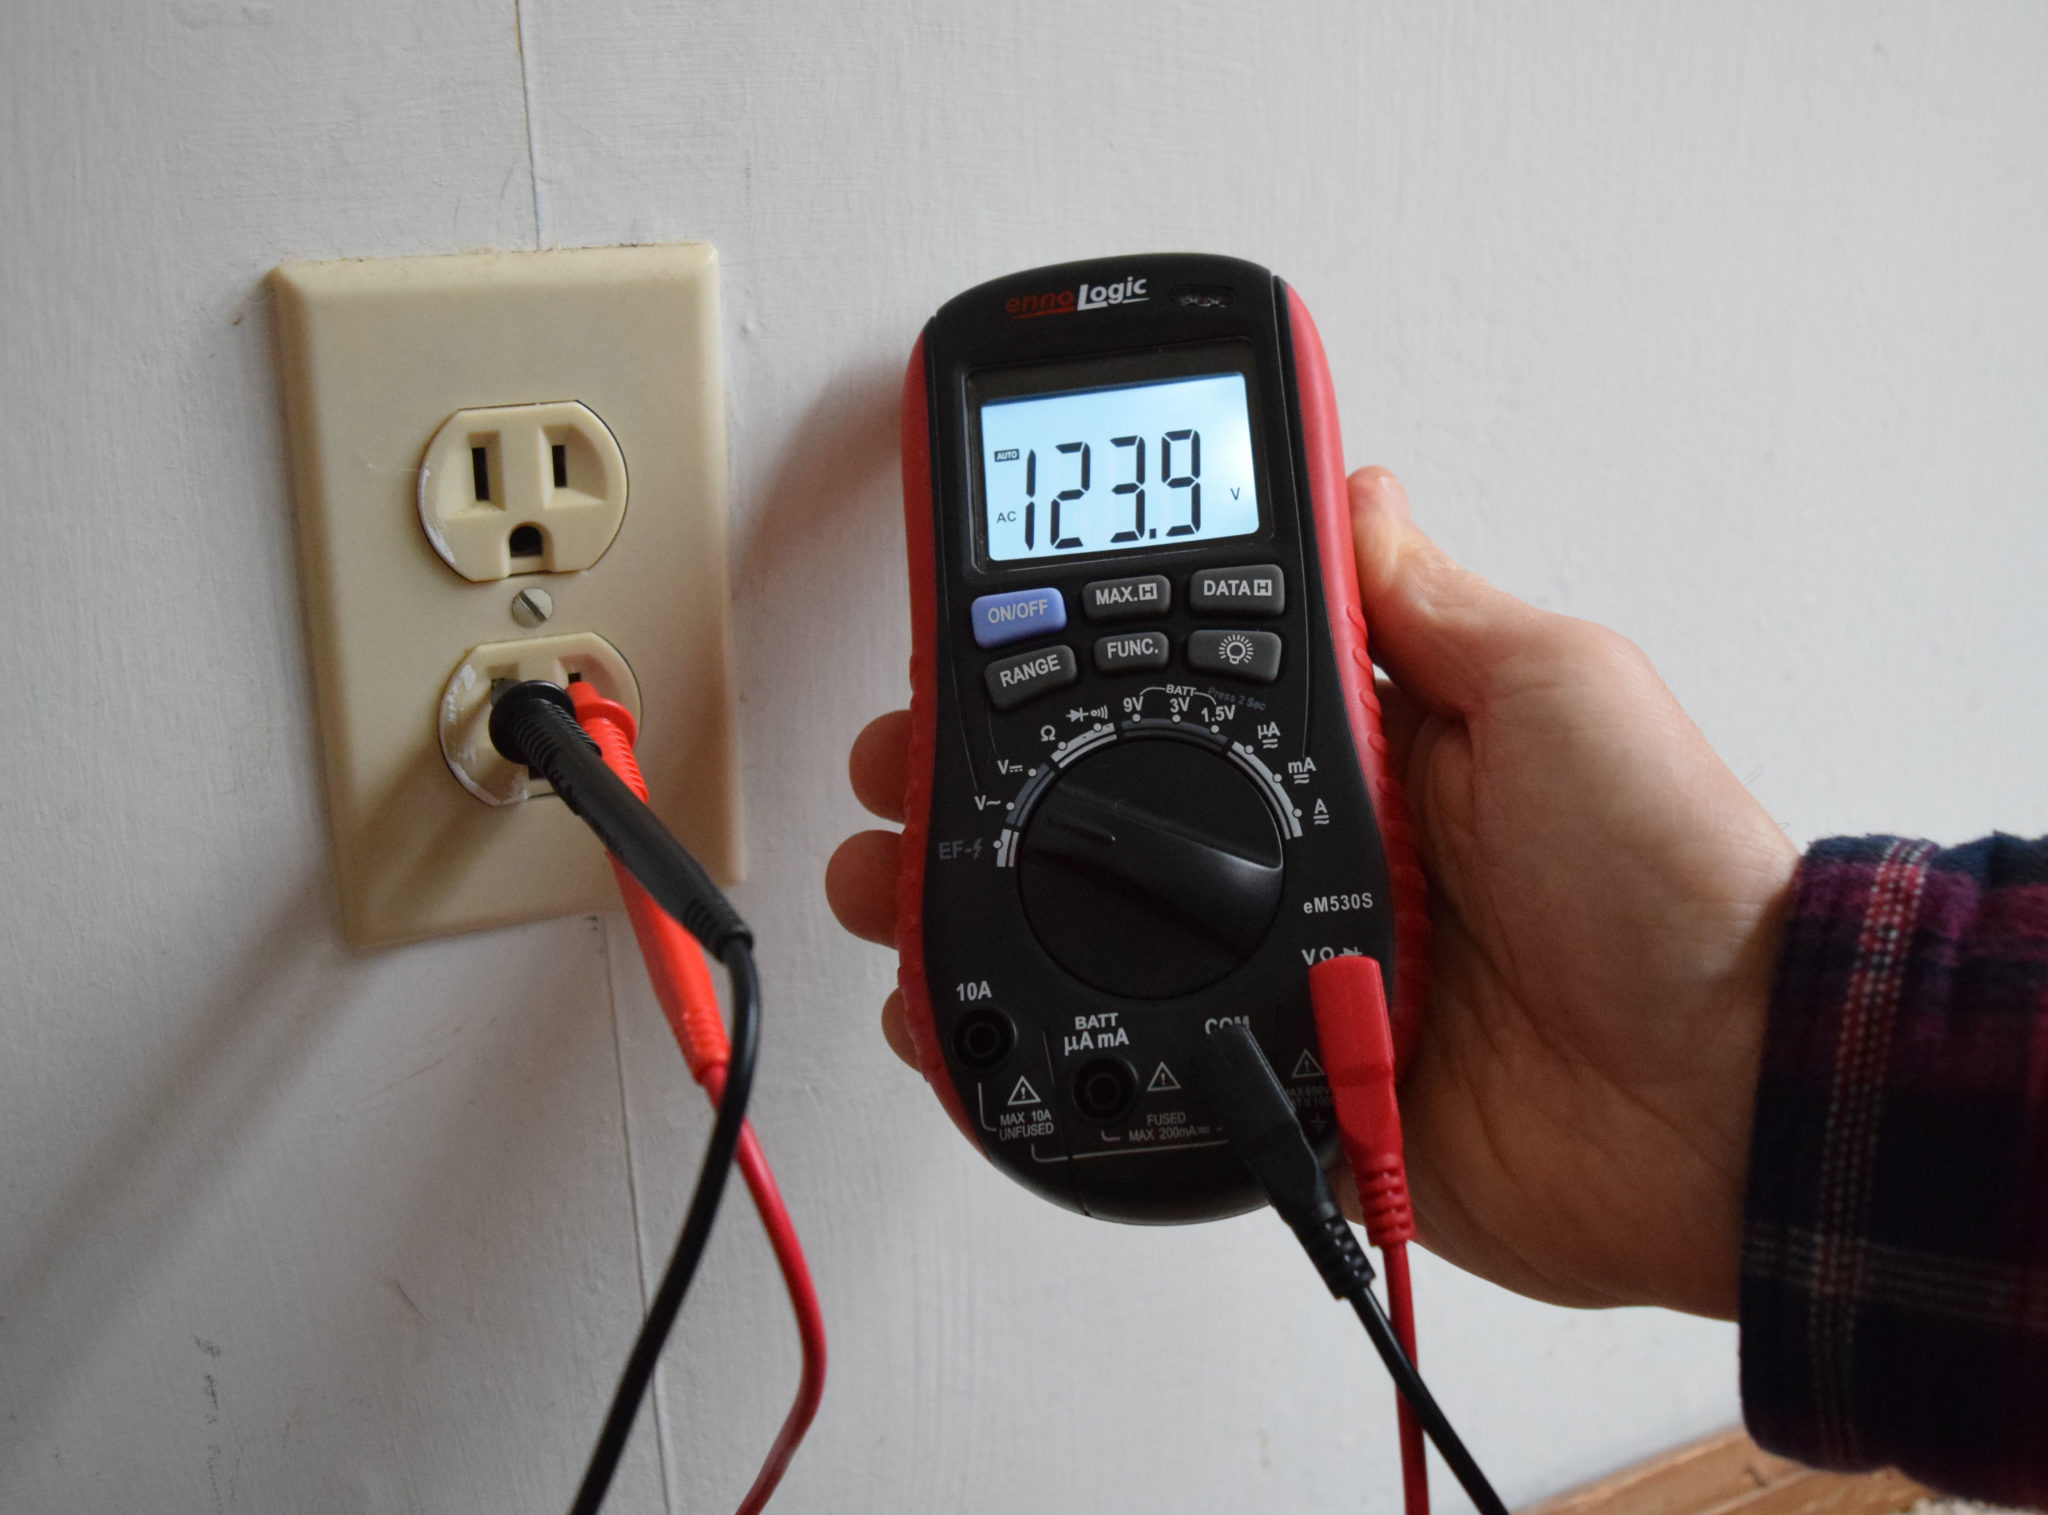 How To Test An Outlet With A Multimeter - How To Use A Multimeter To Test An Outlet